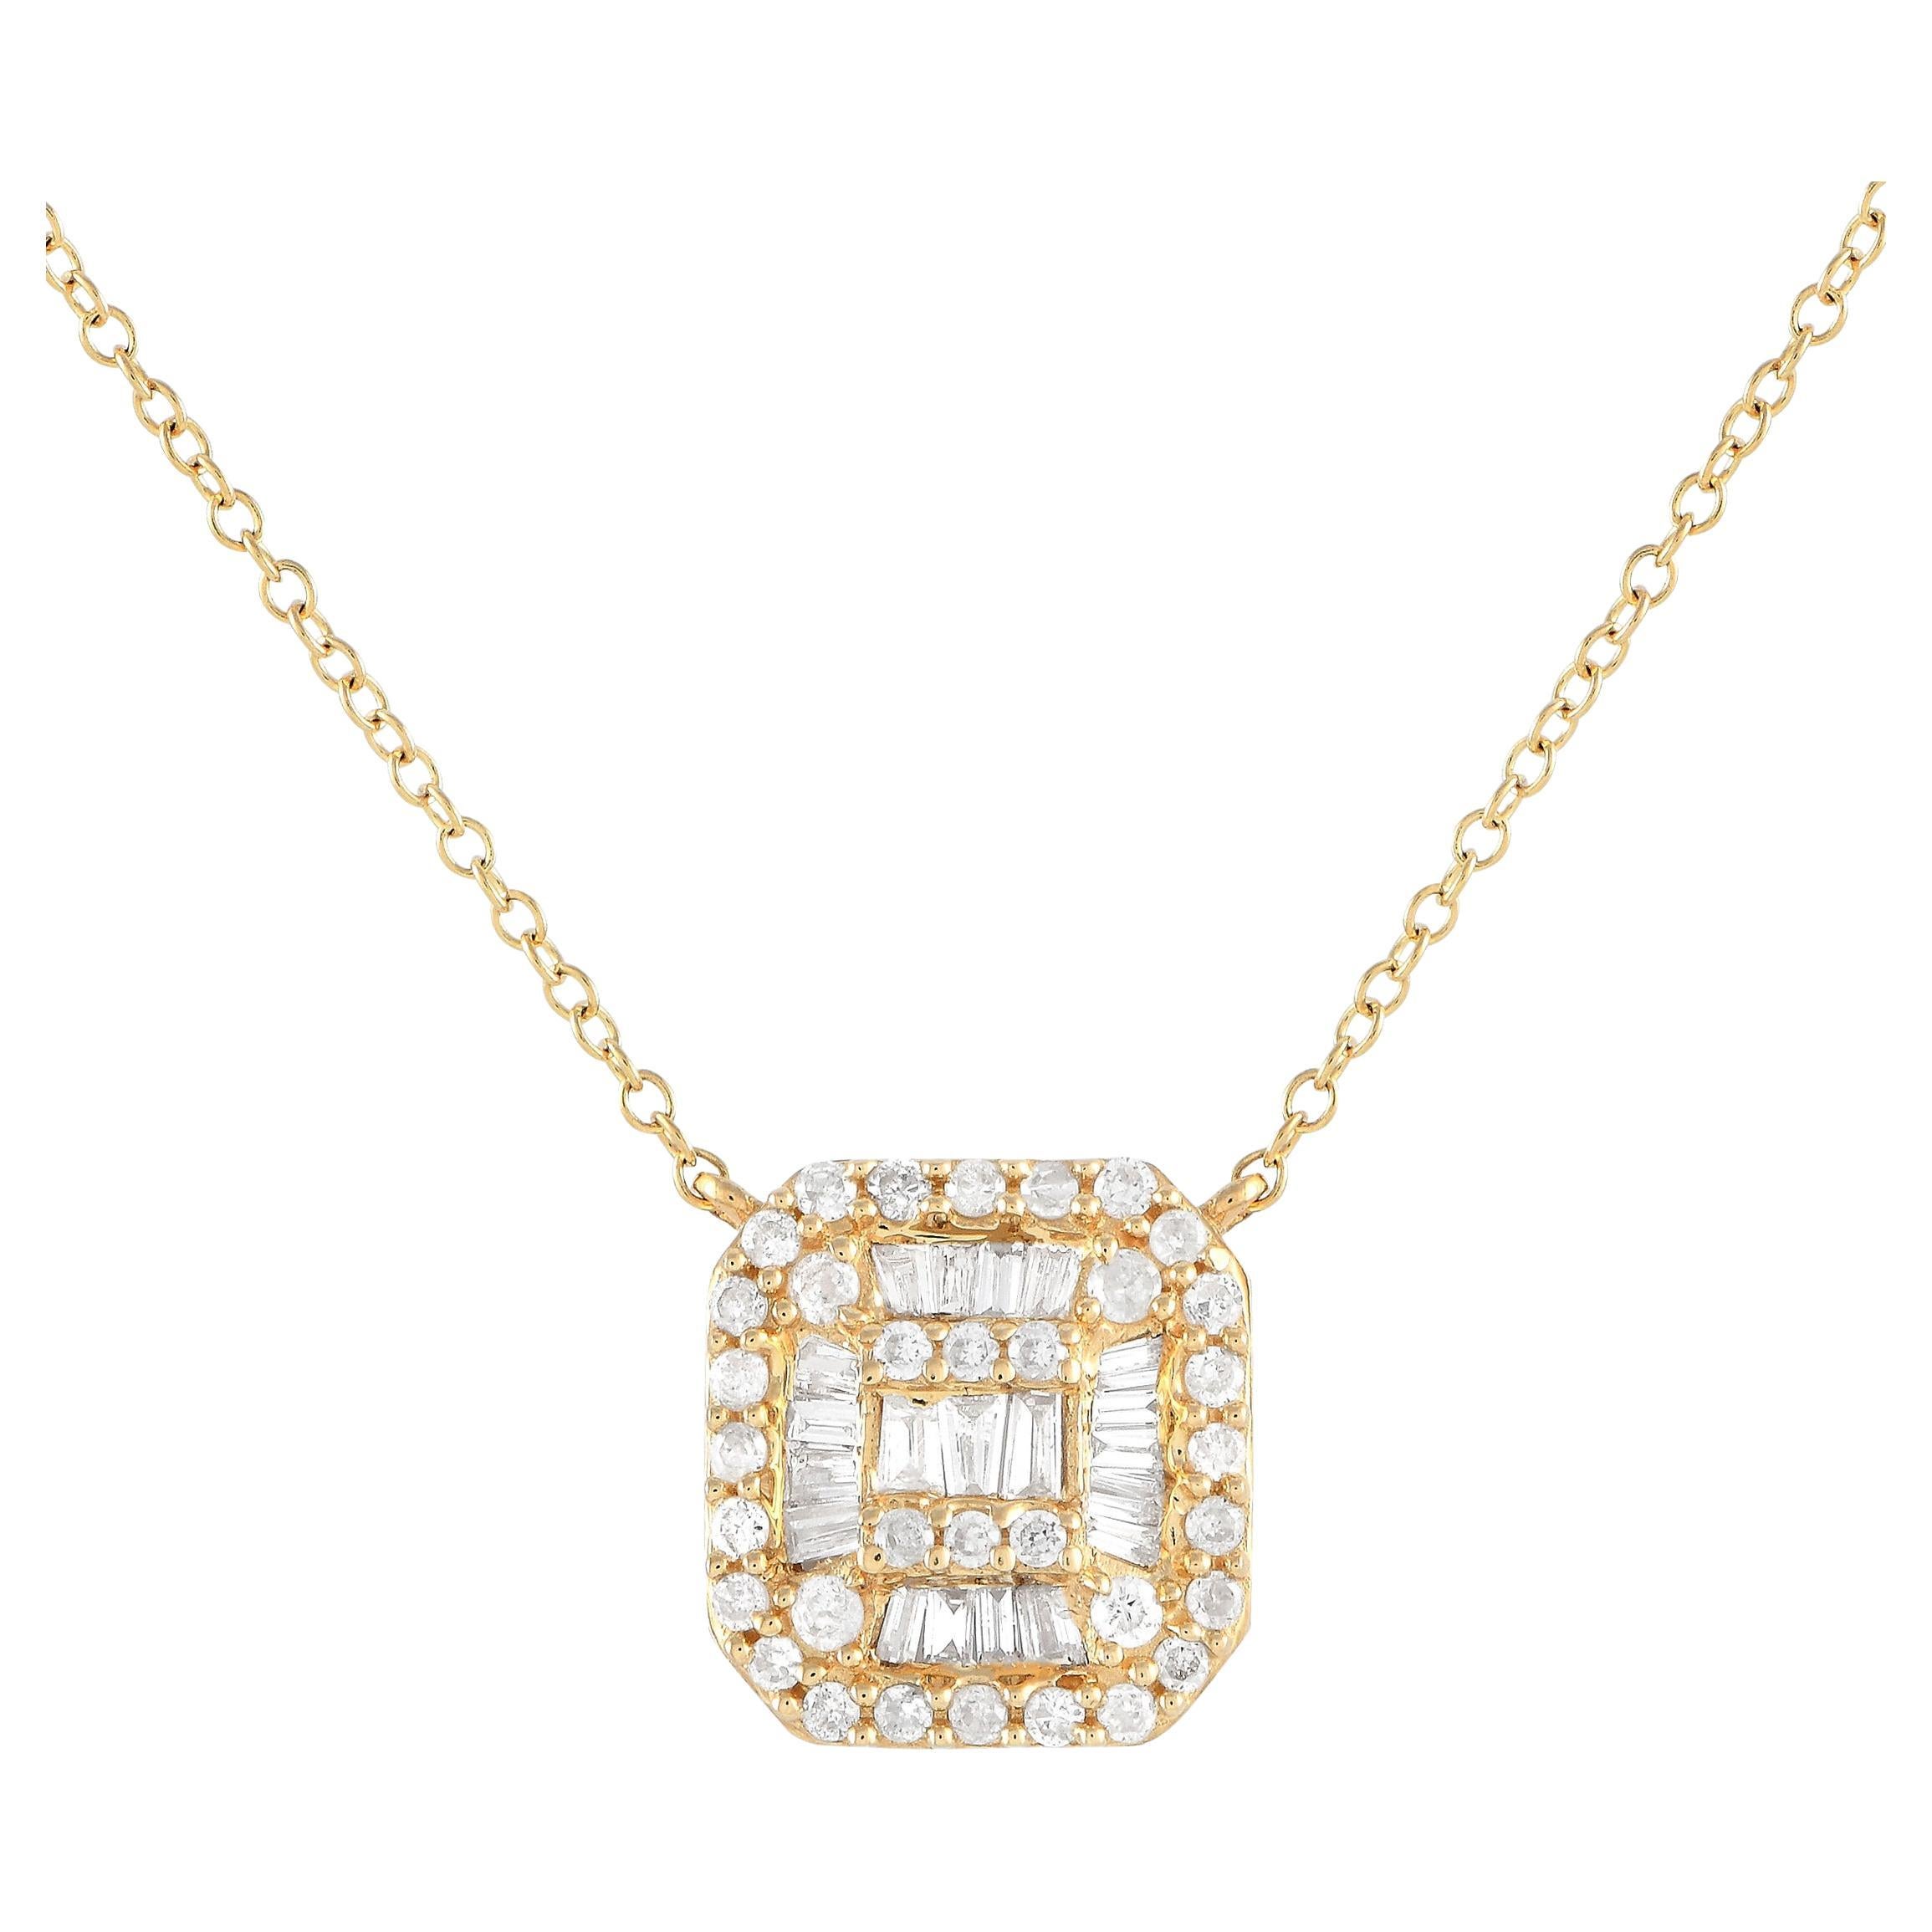 LB Exclusive 14K Yellow Gold 0.30ct Diamond Cluster Cushion Necklace PN14730